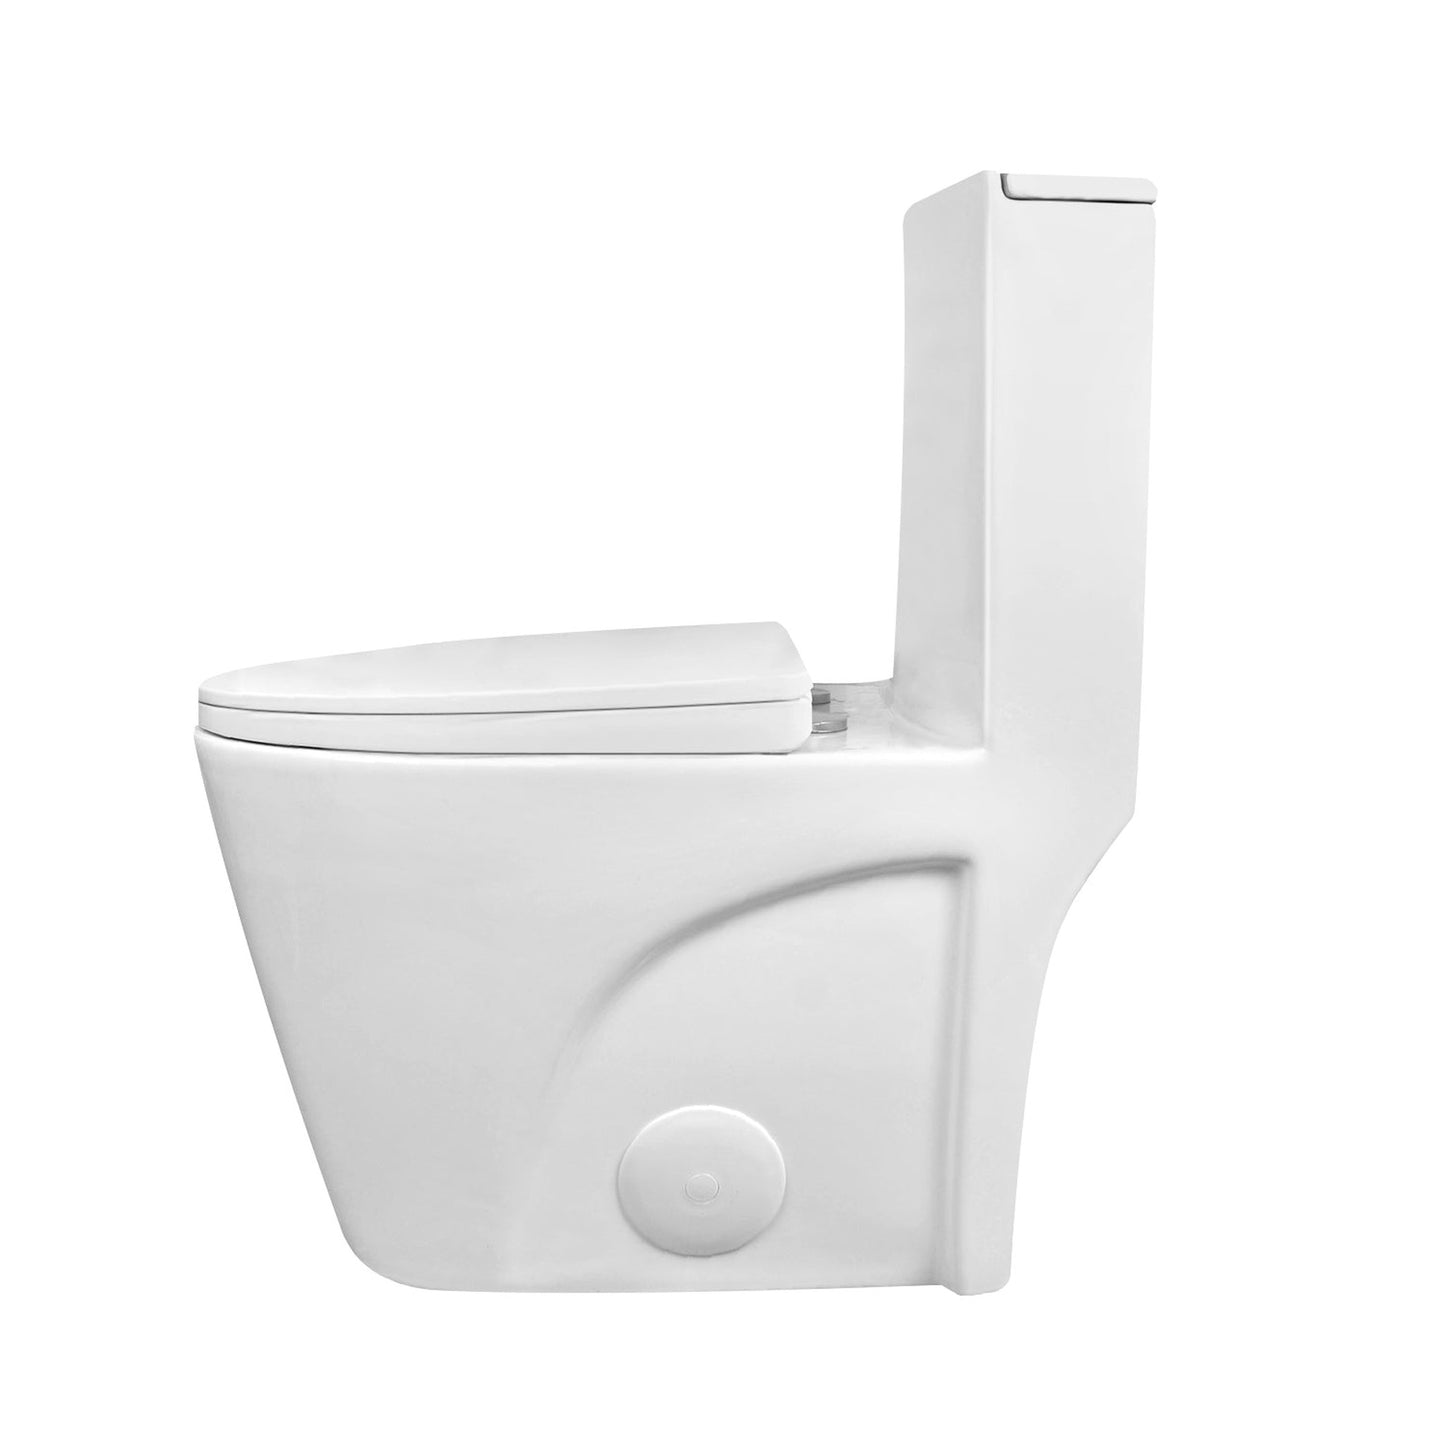 DeerValley Ace DV-1F52102 1.6 GPF Dual-Flush Elongated White One-Piece Toilet